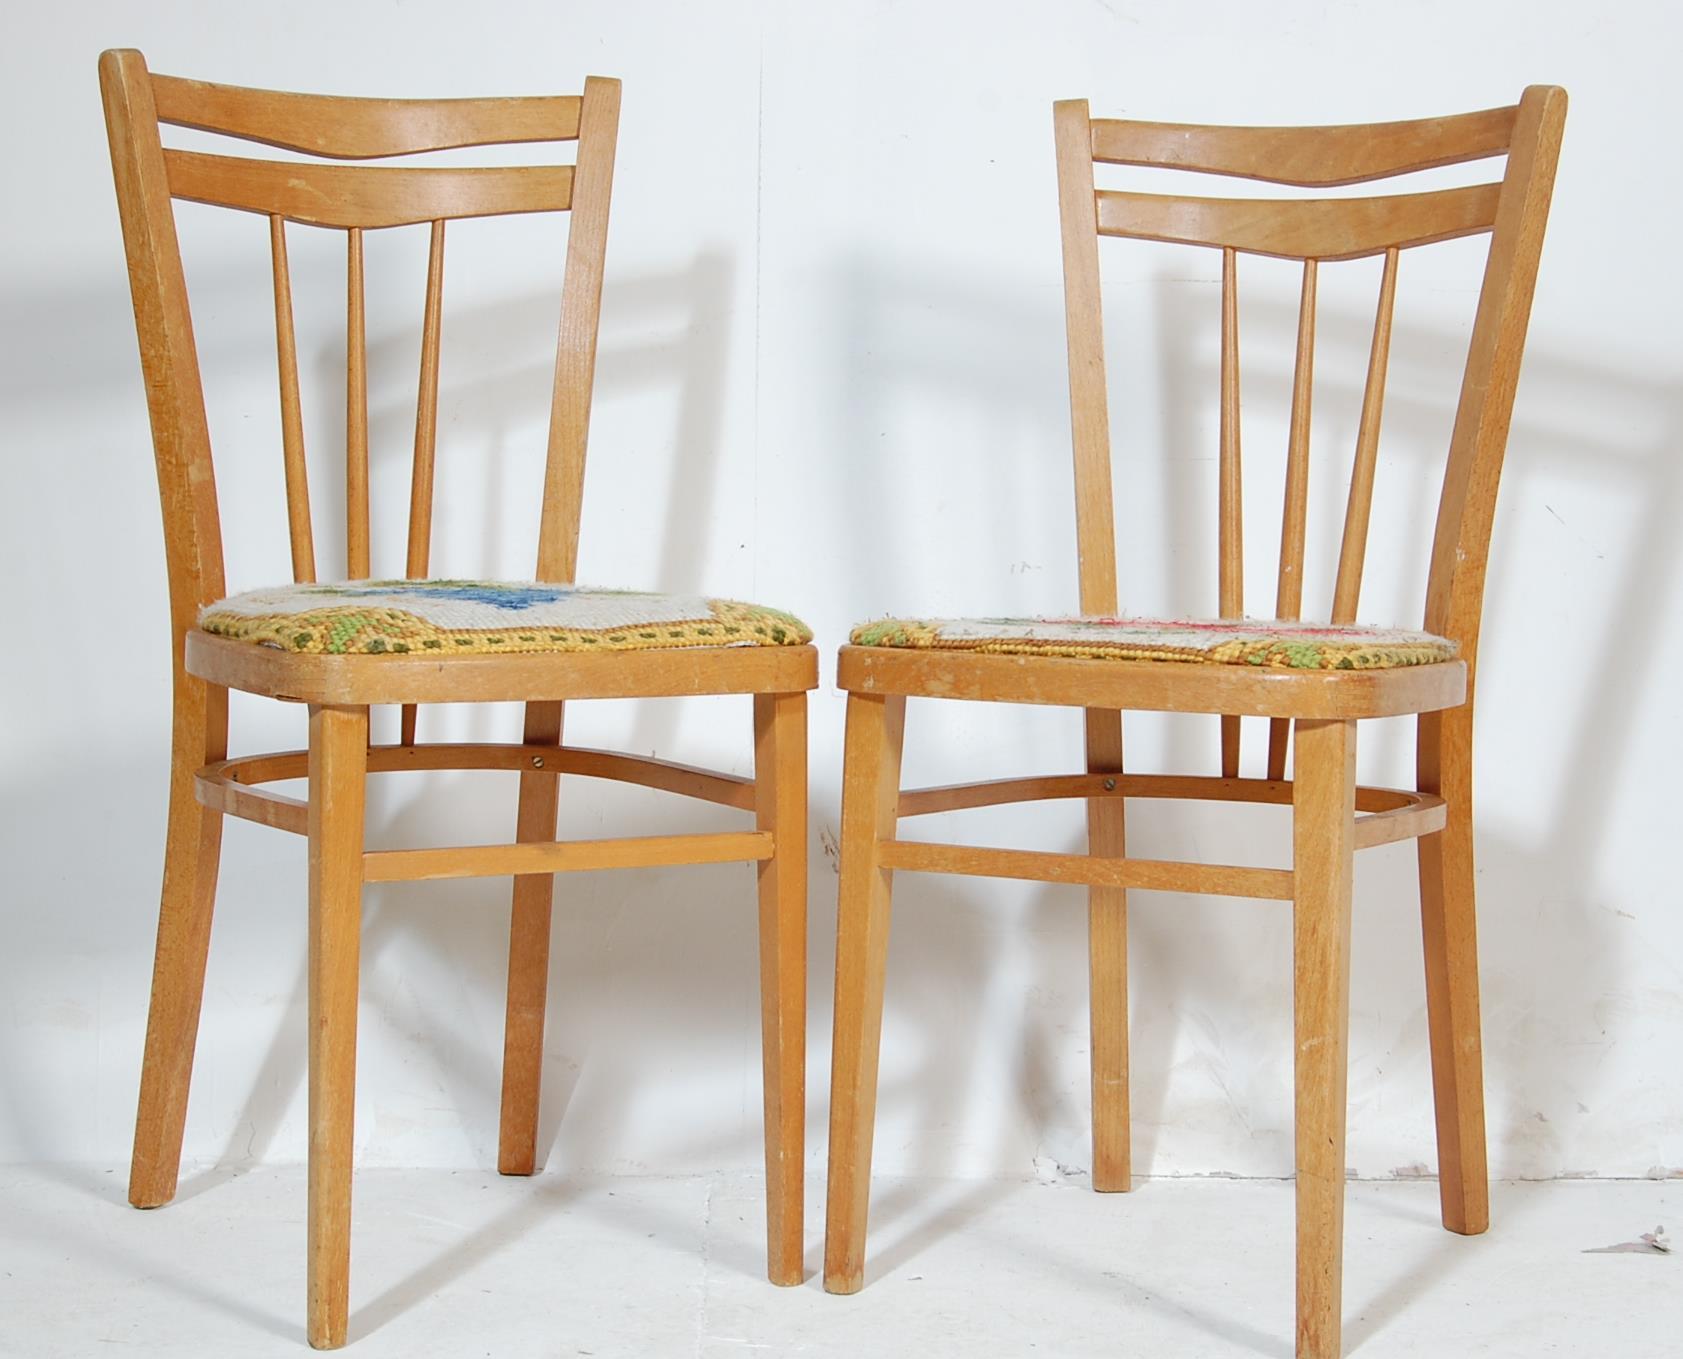 FIVE RETRO 20TH CENTURY DINING CHAIRS / KITCHEN CHAIRS - Image 3 of 5